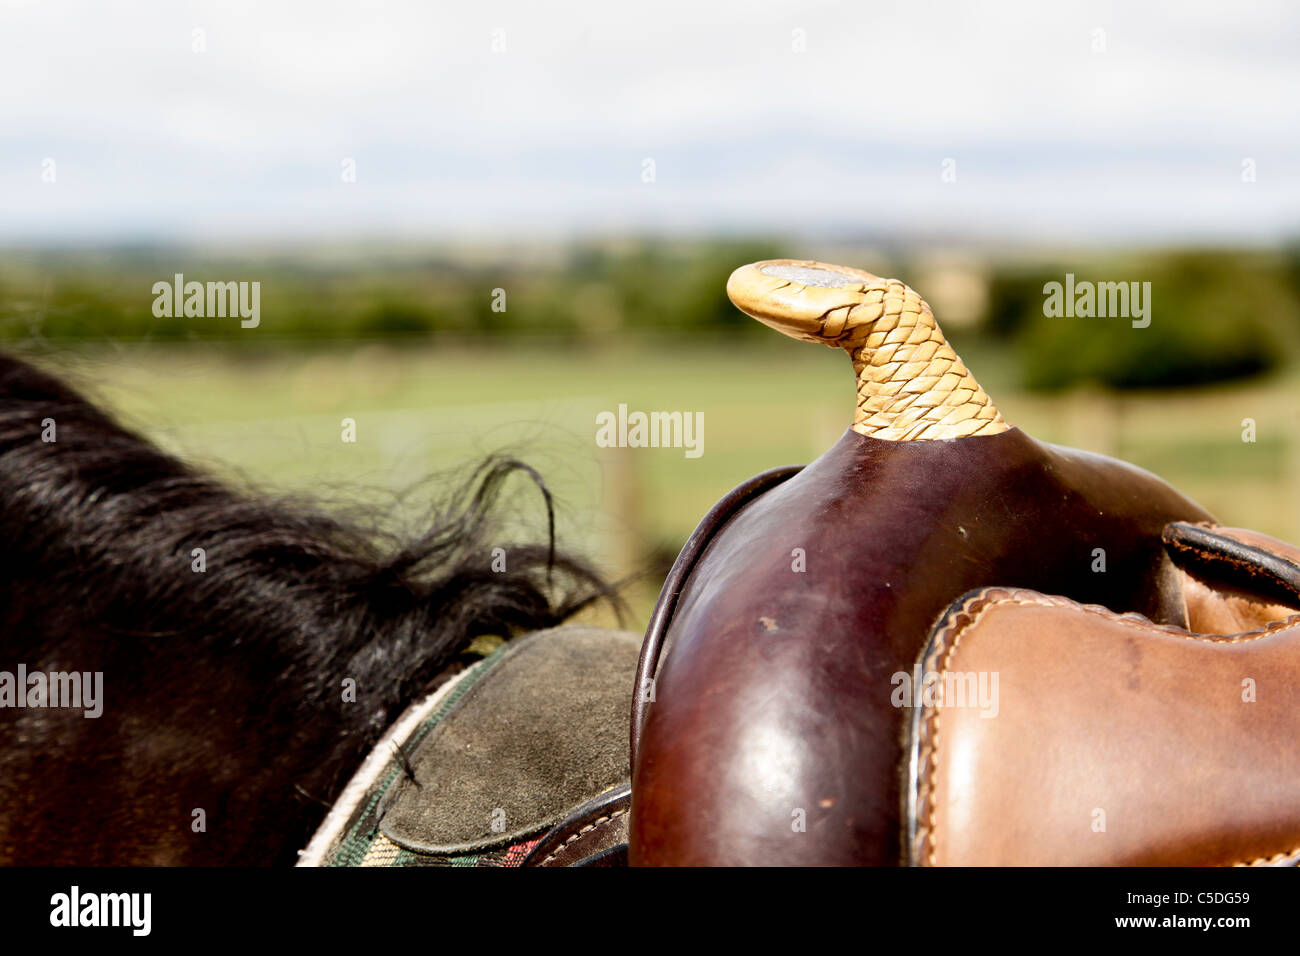 A Western style riding saddle with a leather pommel Stock Photo